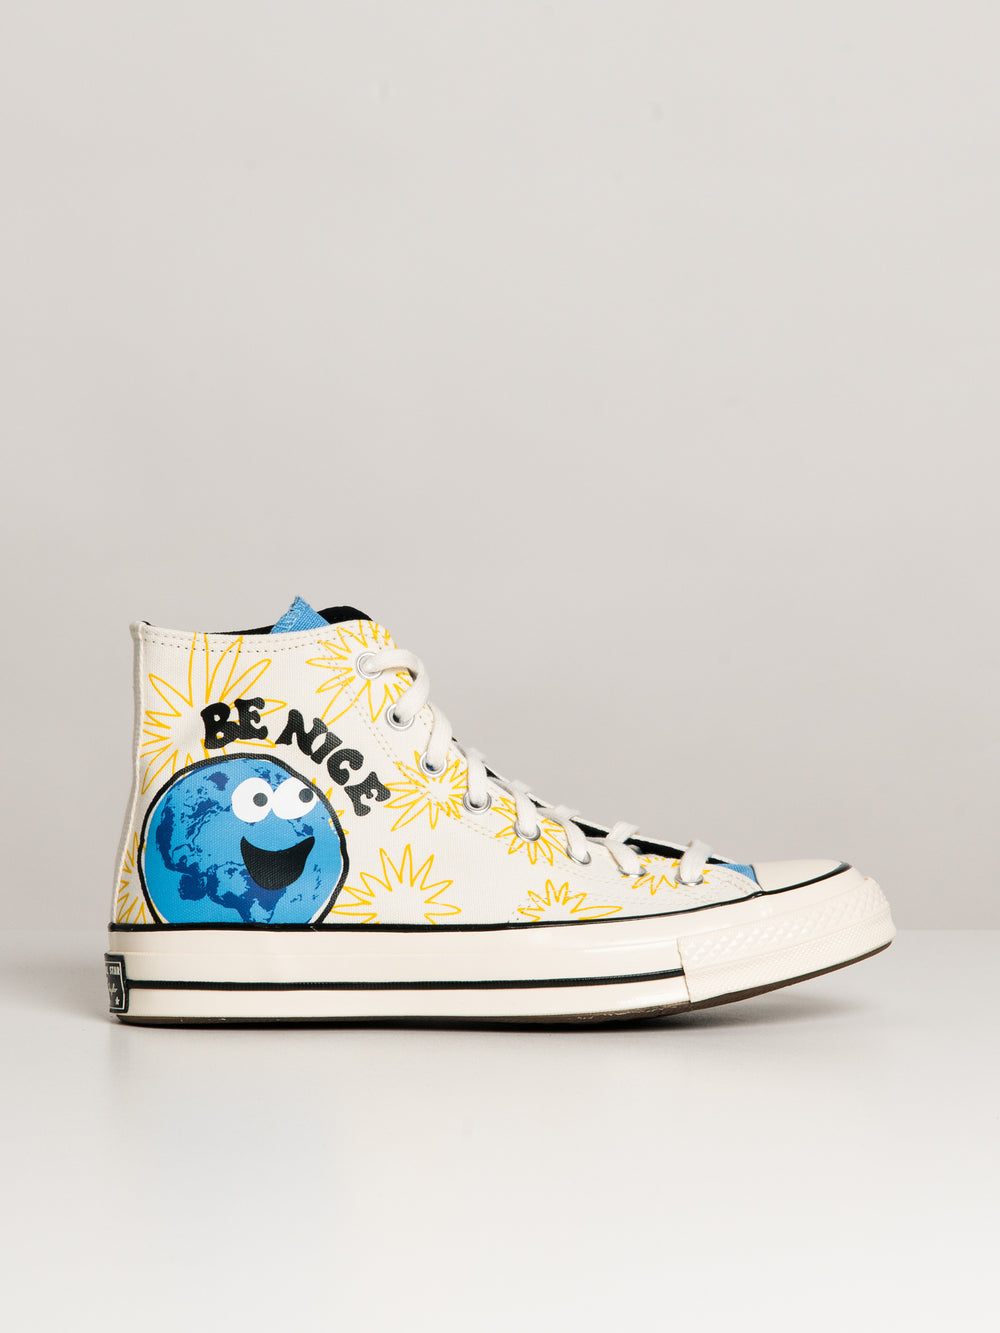 MENS CONVERSE CHUCK 70 BE NICE FLORAL HI SNEAKER - CLEARANCE